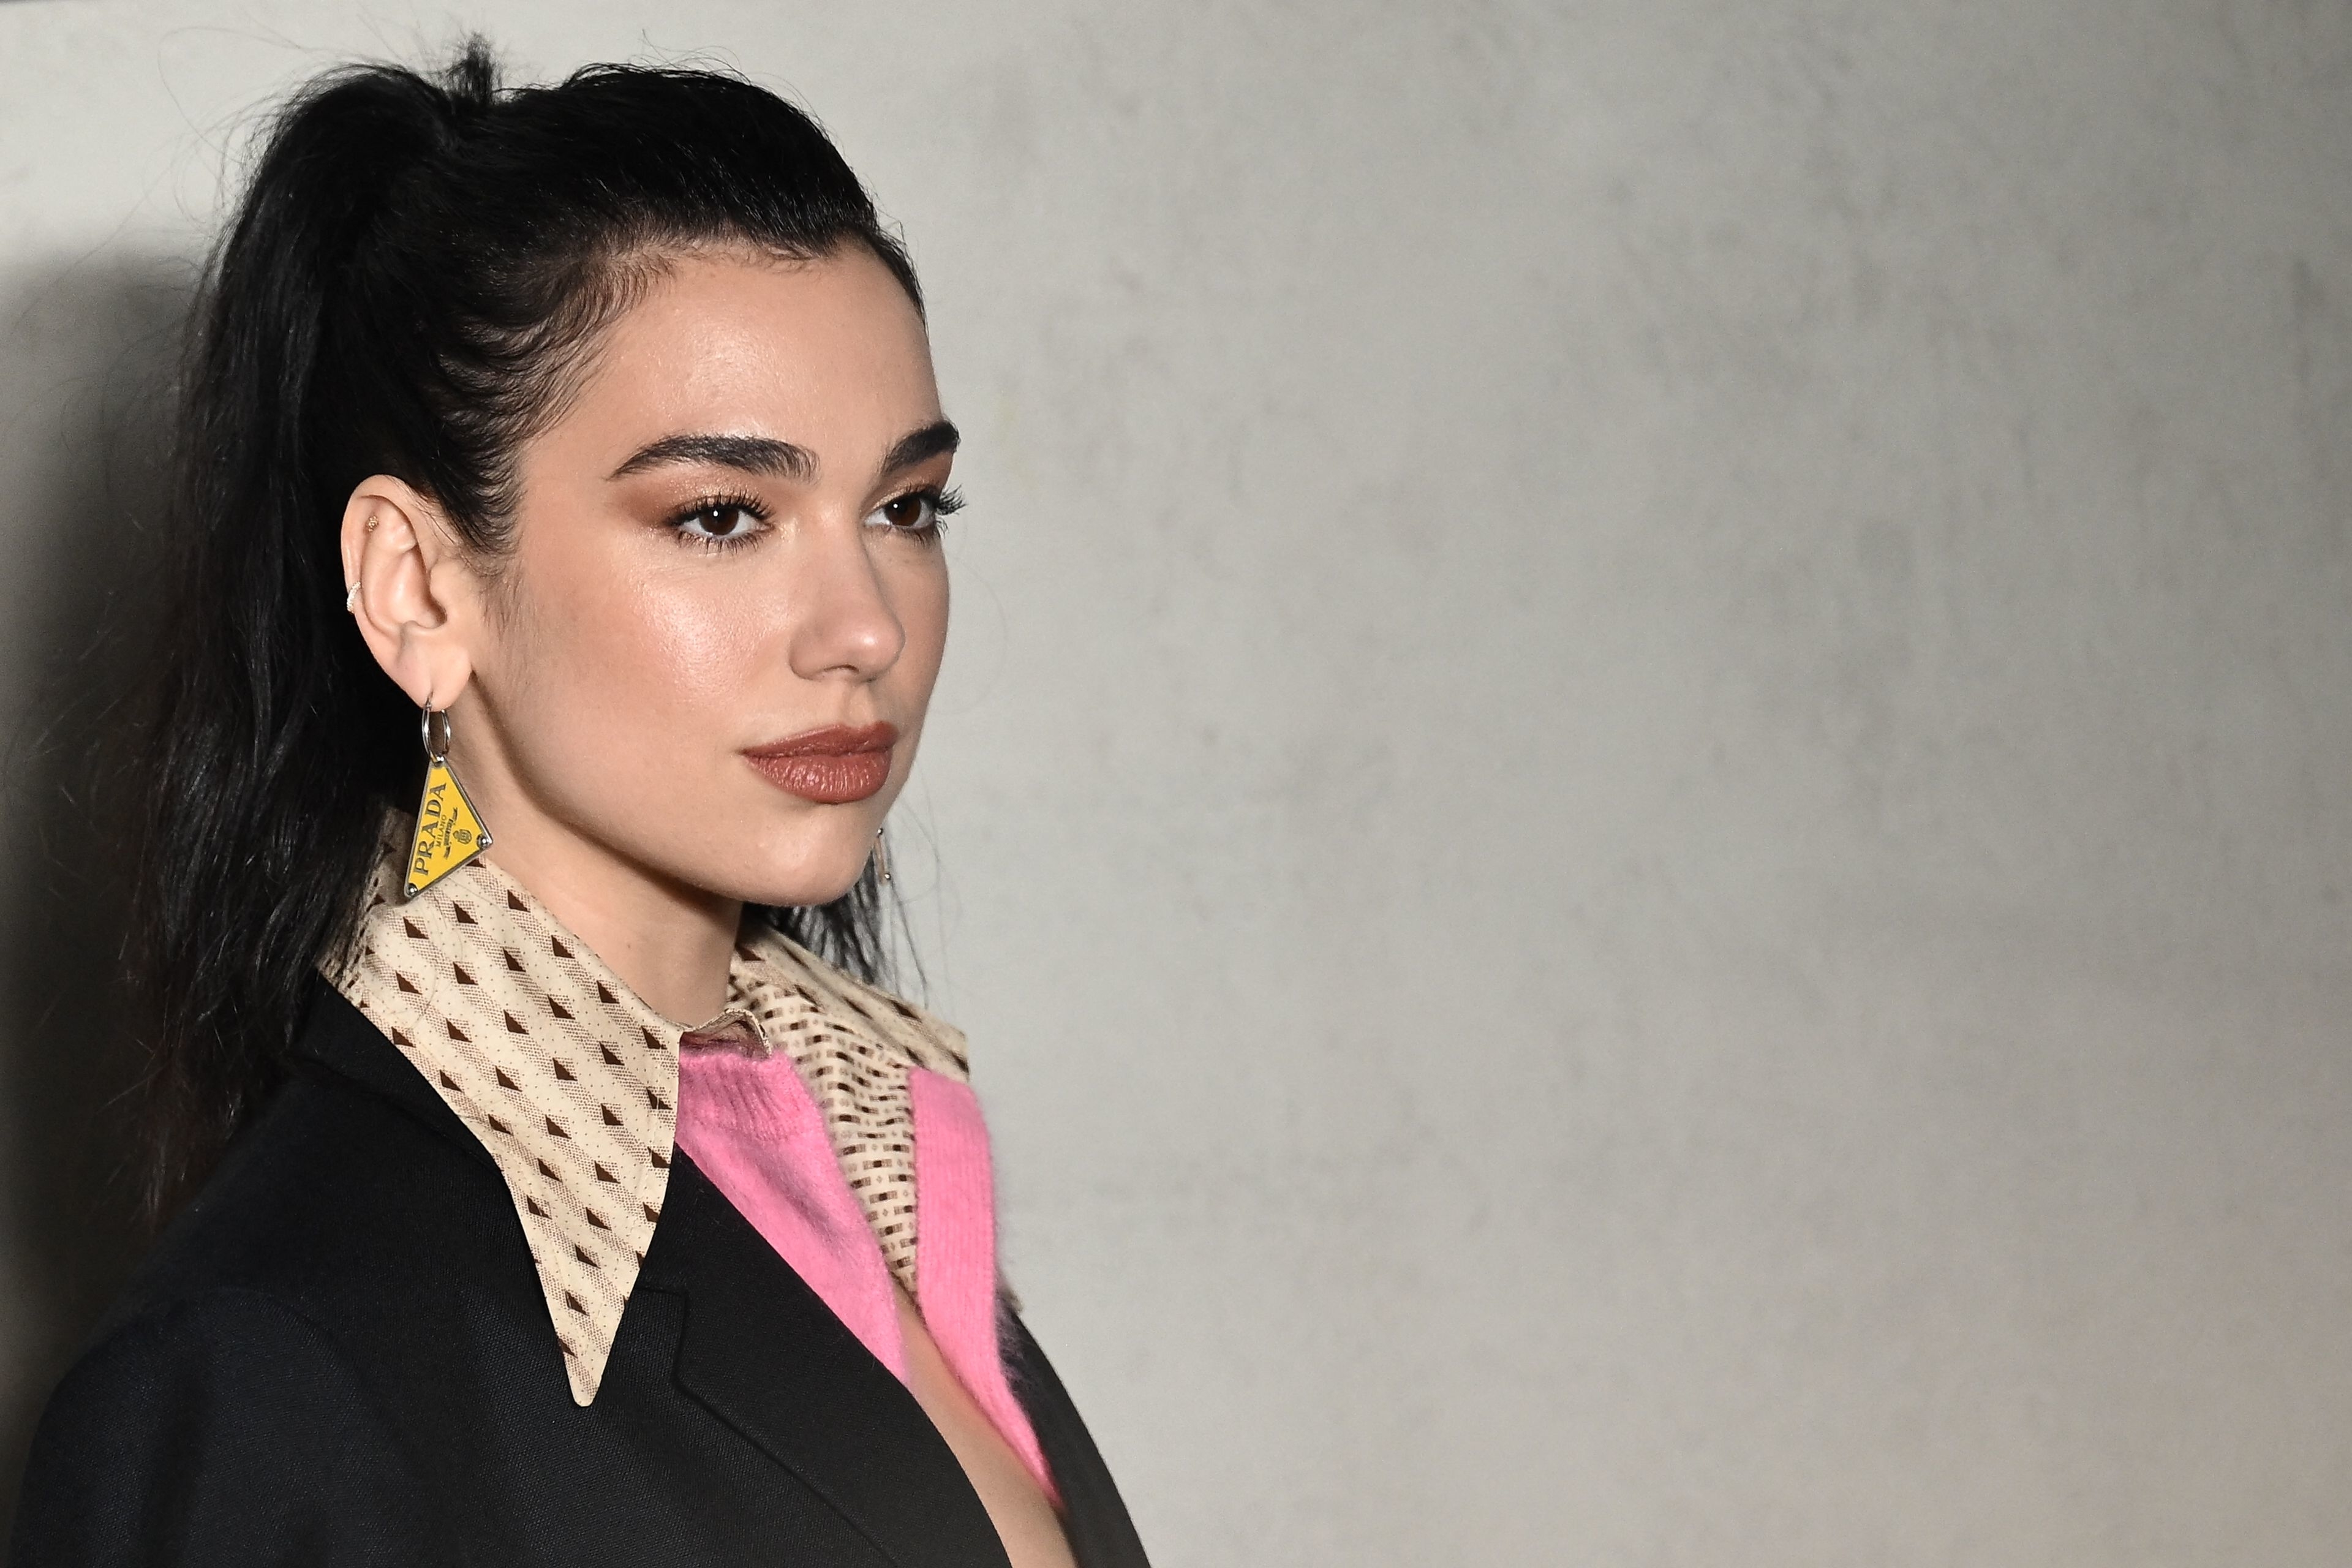 Dua Lipa wearing a stylish, patterned shirt beneath a dark blazer, posing for a photo, with her hair in a high ponytail